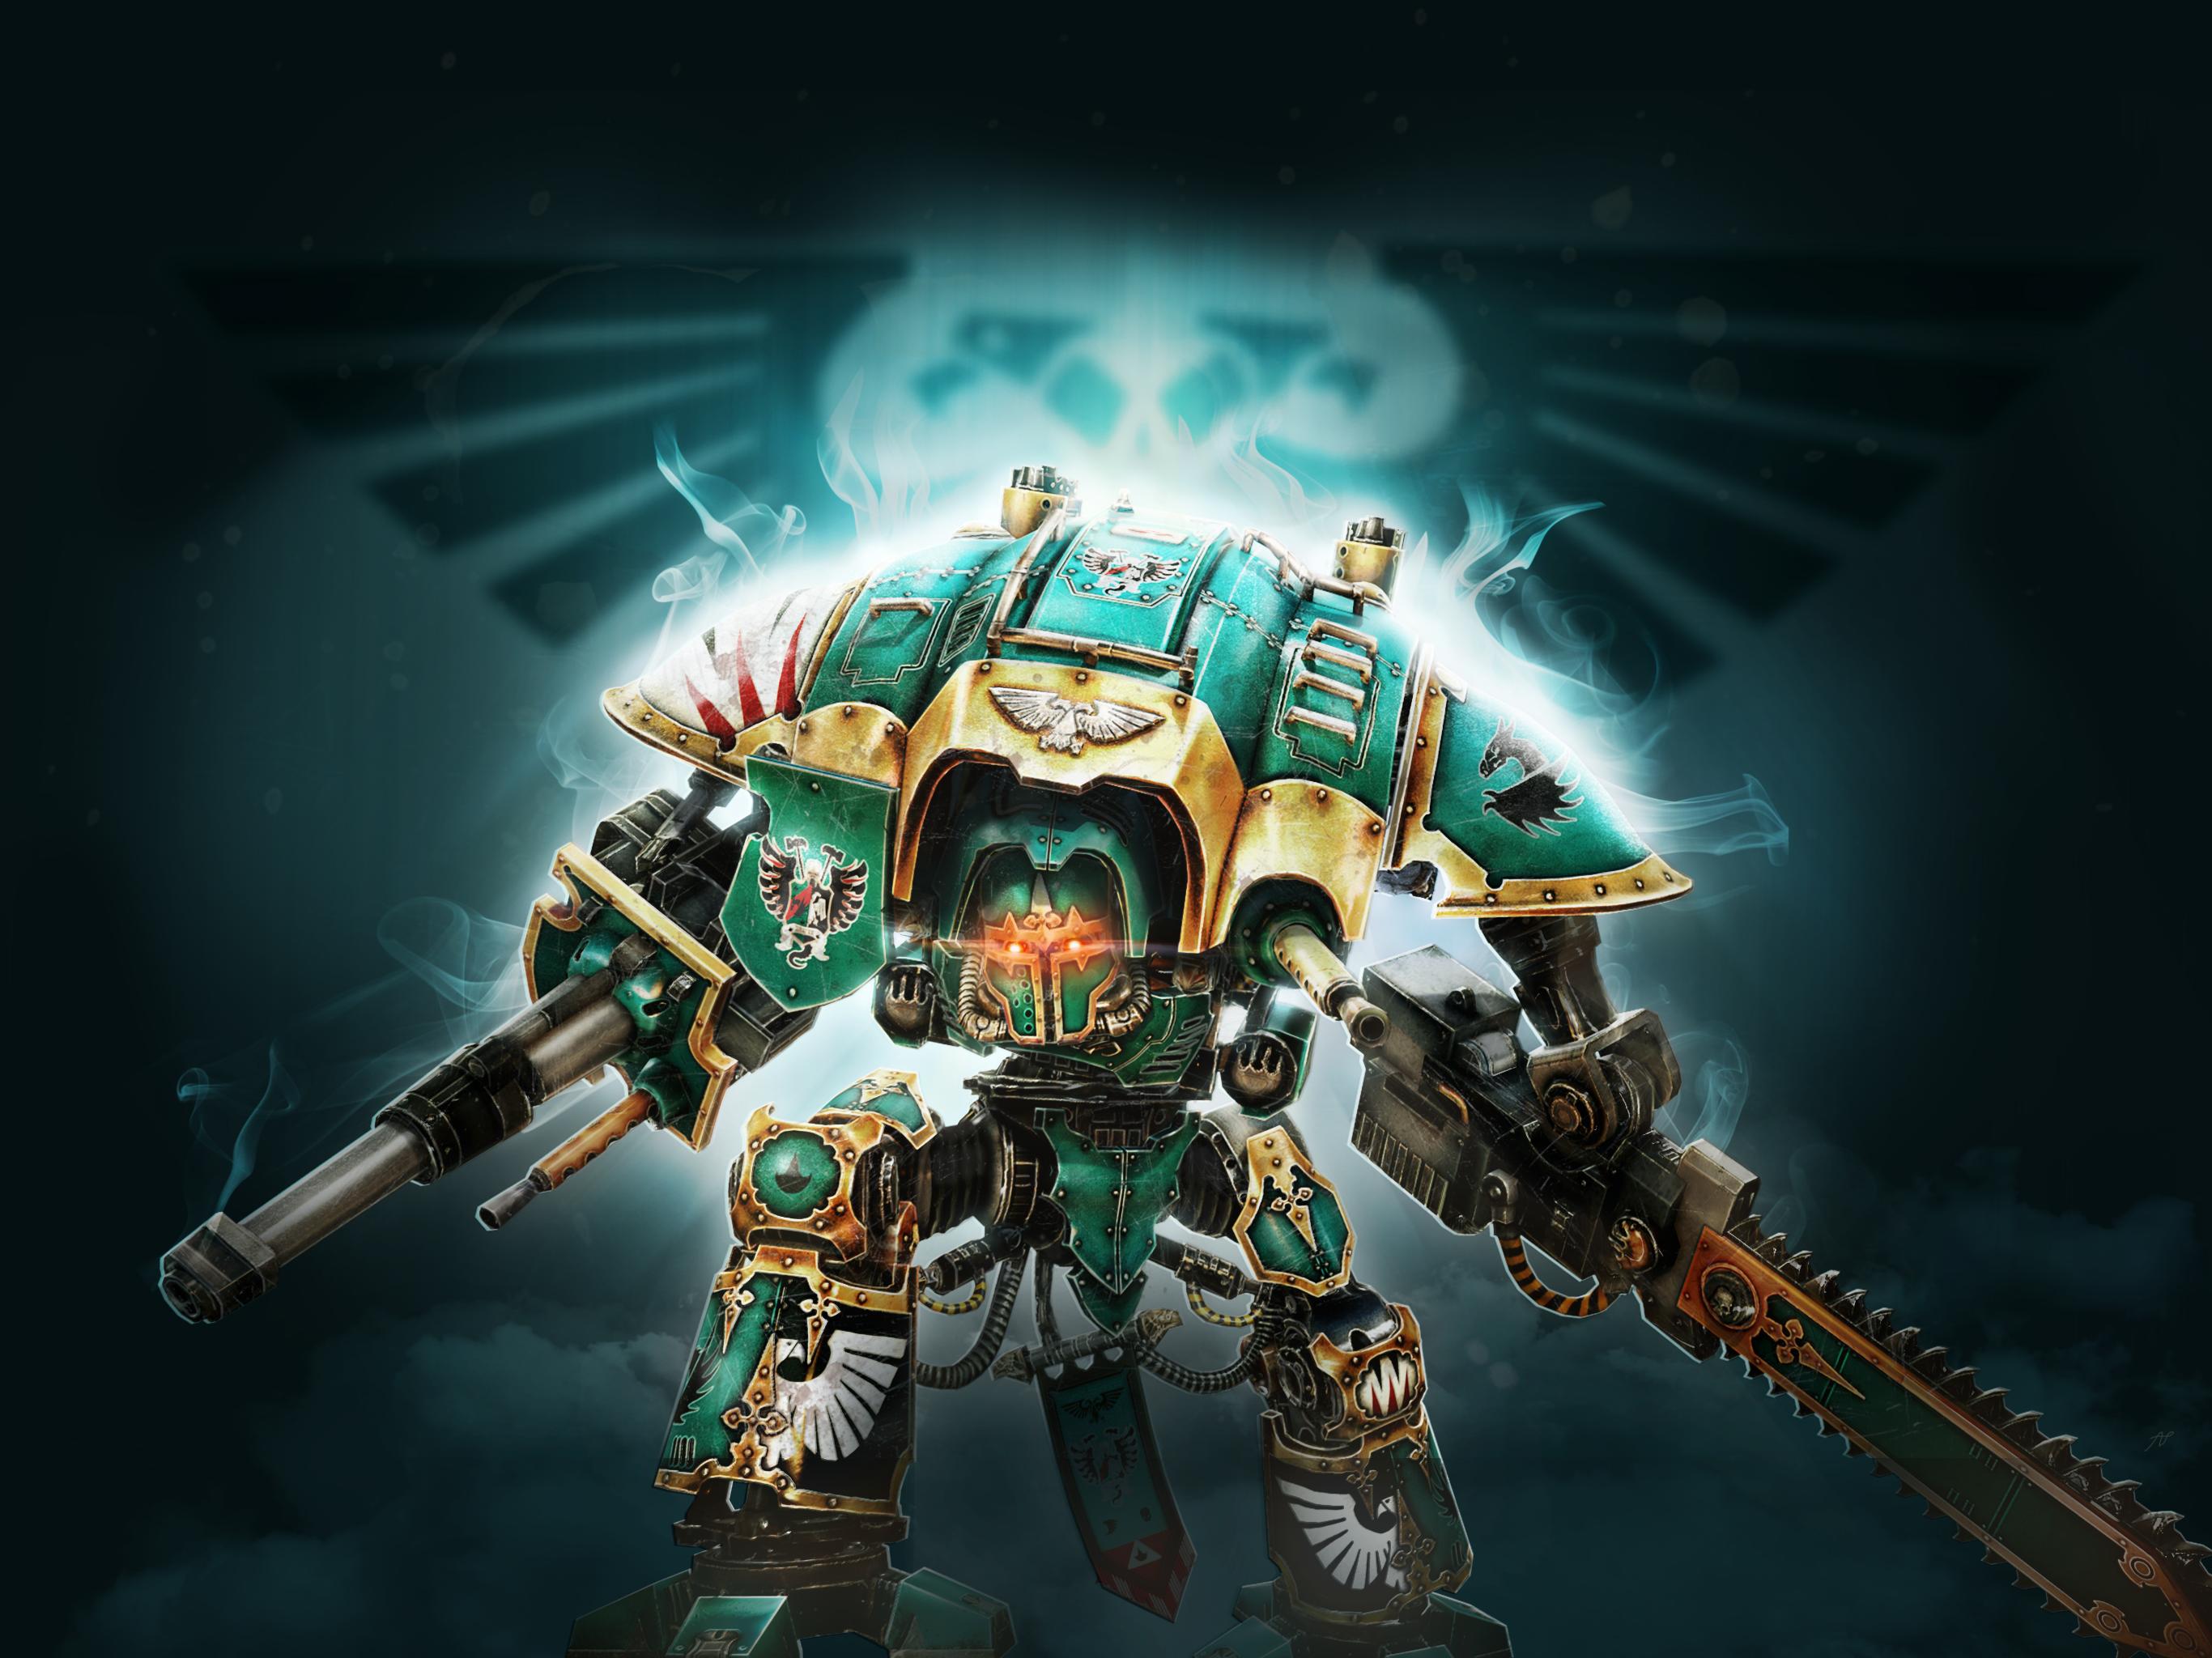 Warhammer 40,000: Freeblade for Android - APK Download